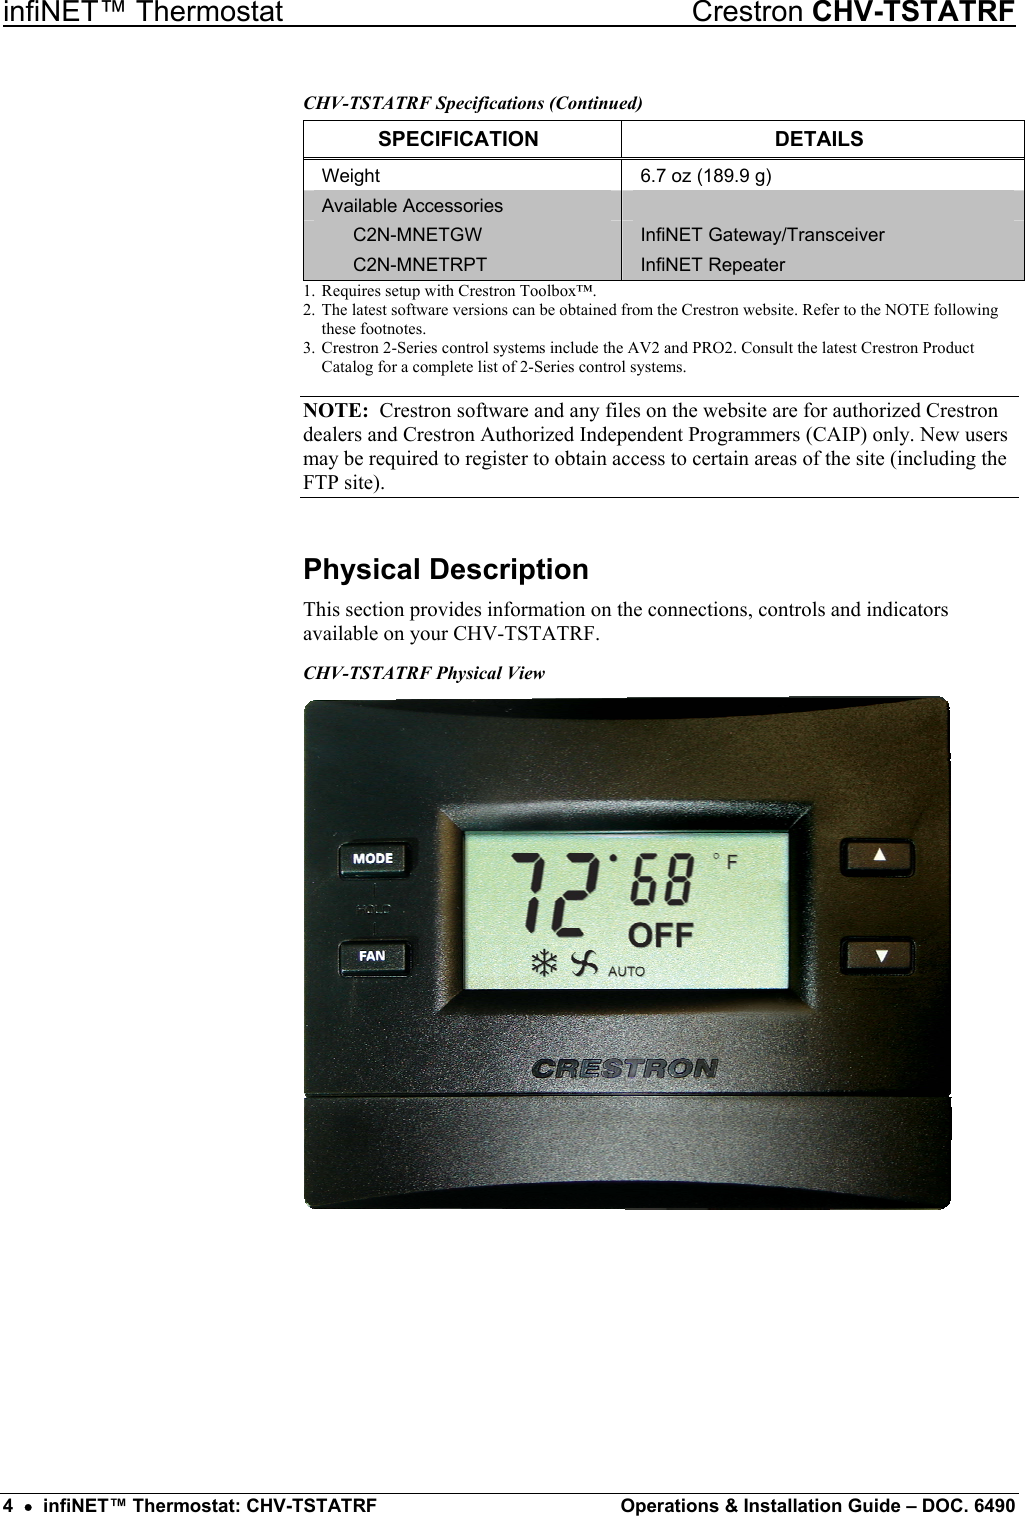 infiNET™ Thermostat    Crestron CHV-TSTATRF CHV-TSTATRF Specifications (Continued) SPECIFICATION DETAILS Weight  6.7 oz (189.9 g) Available Accessories    C2N-MNETGW  InfiNET Gateway/Transceiver  C2N-MNETRPT  InfiNET Repeater 1.  Requires setup with Crestron Toolbox™. 2.  The latest software versions can be obtained from the Crestron website. Refer to the NOTE following these footnotes. 3.  Crestron 2-Series control systems include the AV2 and PRO2. Consult the latest Crestron Product Catalog for a complete list of 2-Series control systems. NOTE:  Crestron software and any files on the website are for authorized Crestron dealers and Crestron Authorized Independent Programmers (CAIP) only. New users may be required to register to obtain access to certain areas of the site (including the FTP site). Physical Description This section provides information on the connections, controls and indicators available on your CHV-TSTATRF. CHV-TSTATRF Physical View  4  •  infiNET™ Thermostat: CHV-TSTATRF  Operations &amp; Installation Guide – DOC. 6490 